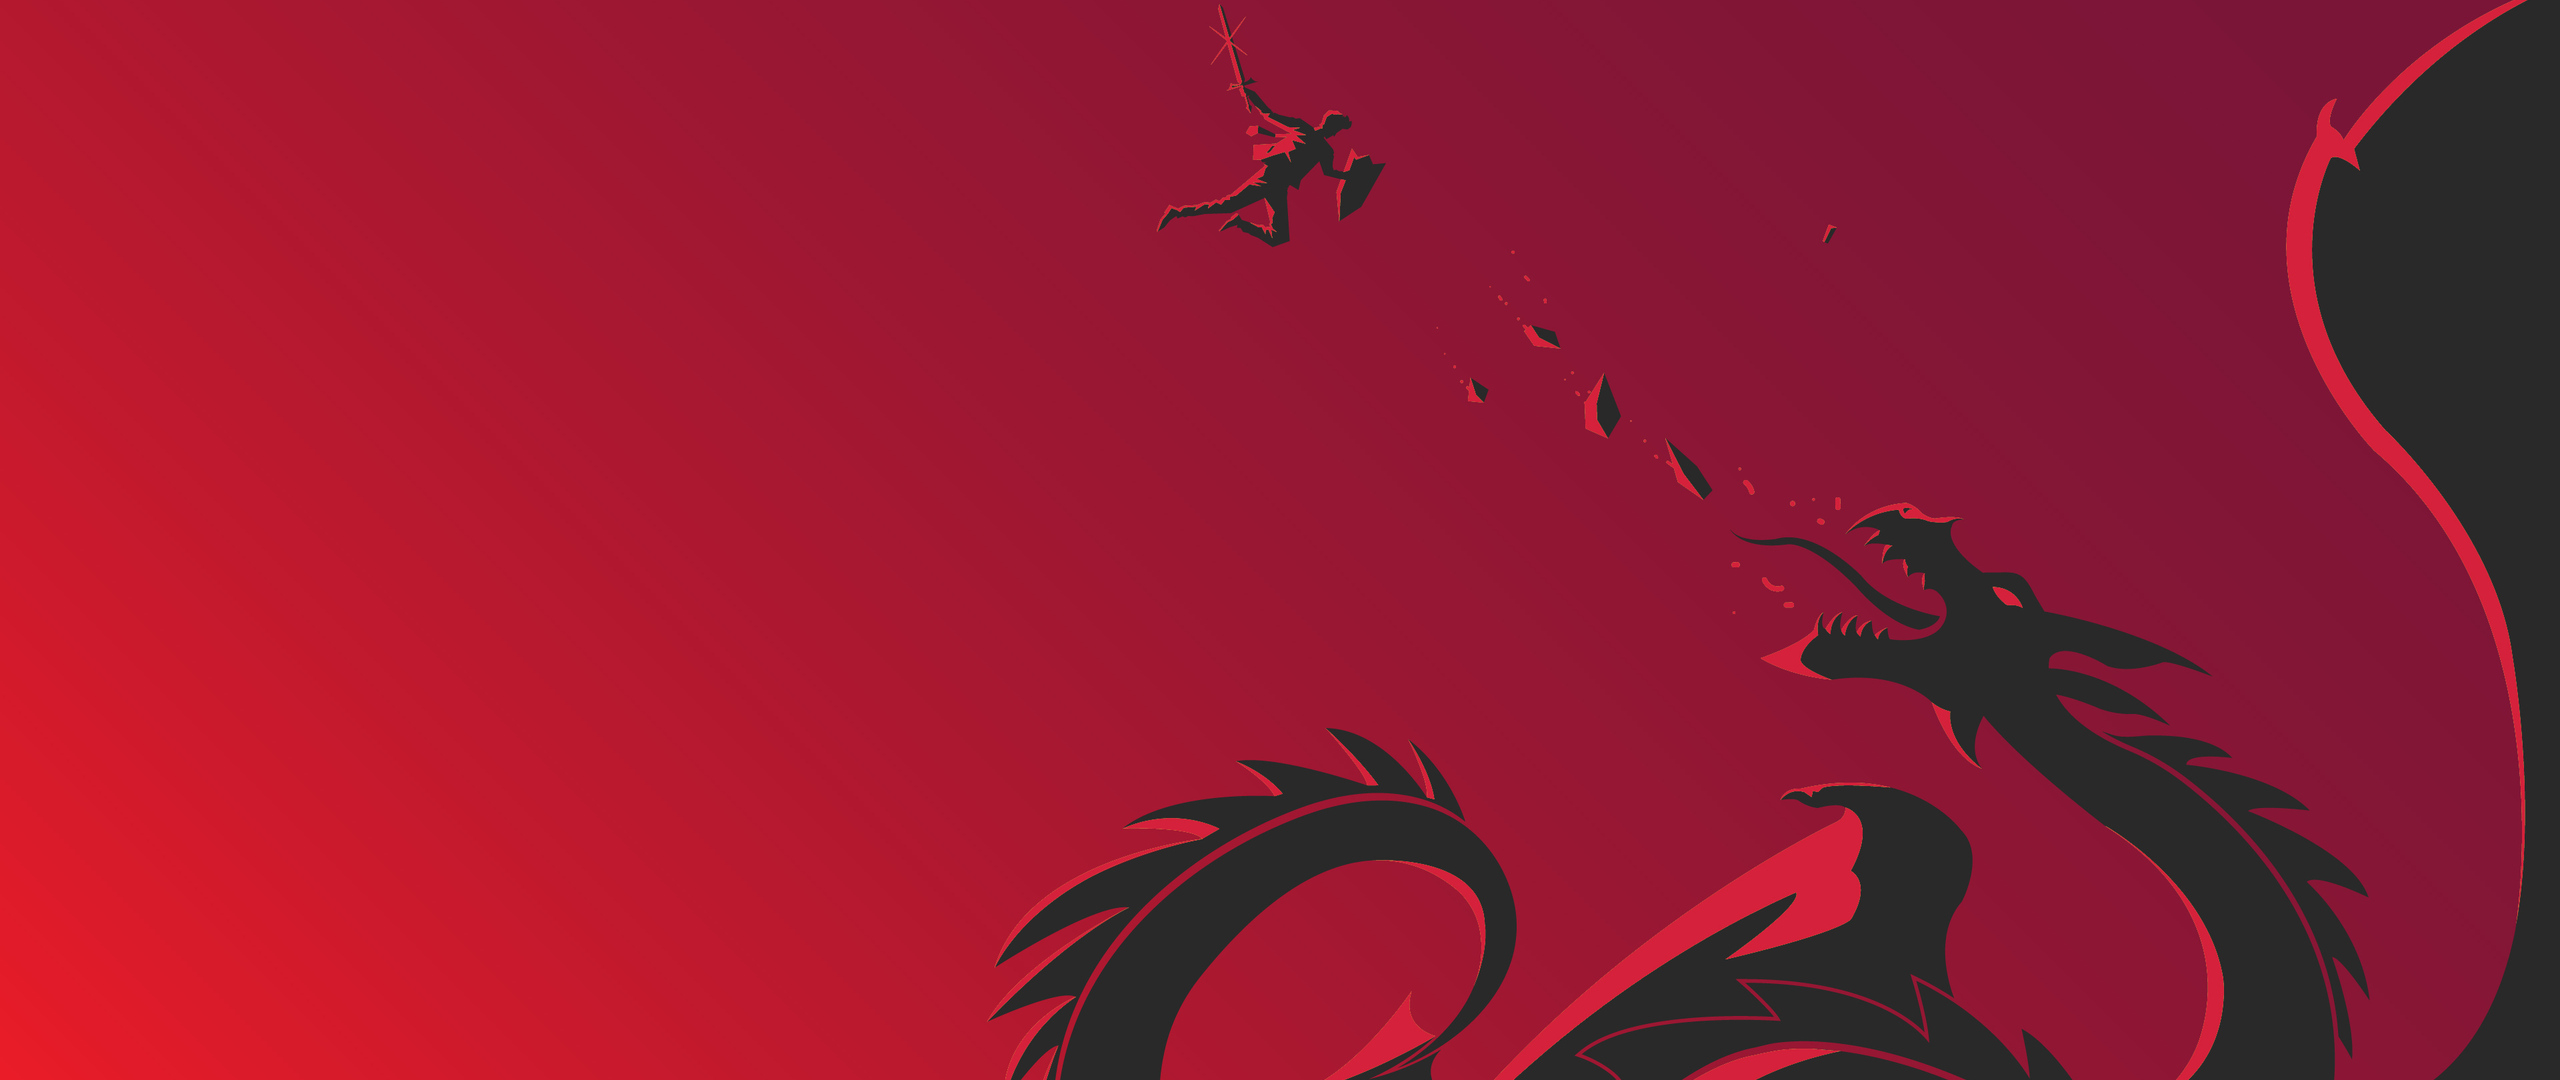 2560x1080 Red Dragon Vs Warrior Resolution HD 4k Wallpapers, Images, Backgrounds, Photos and Pictures